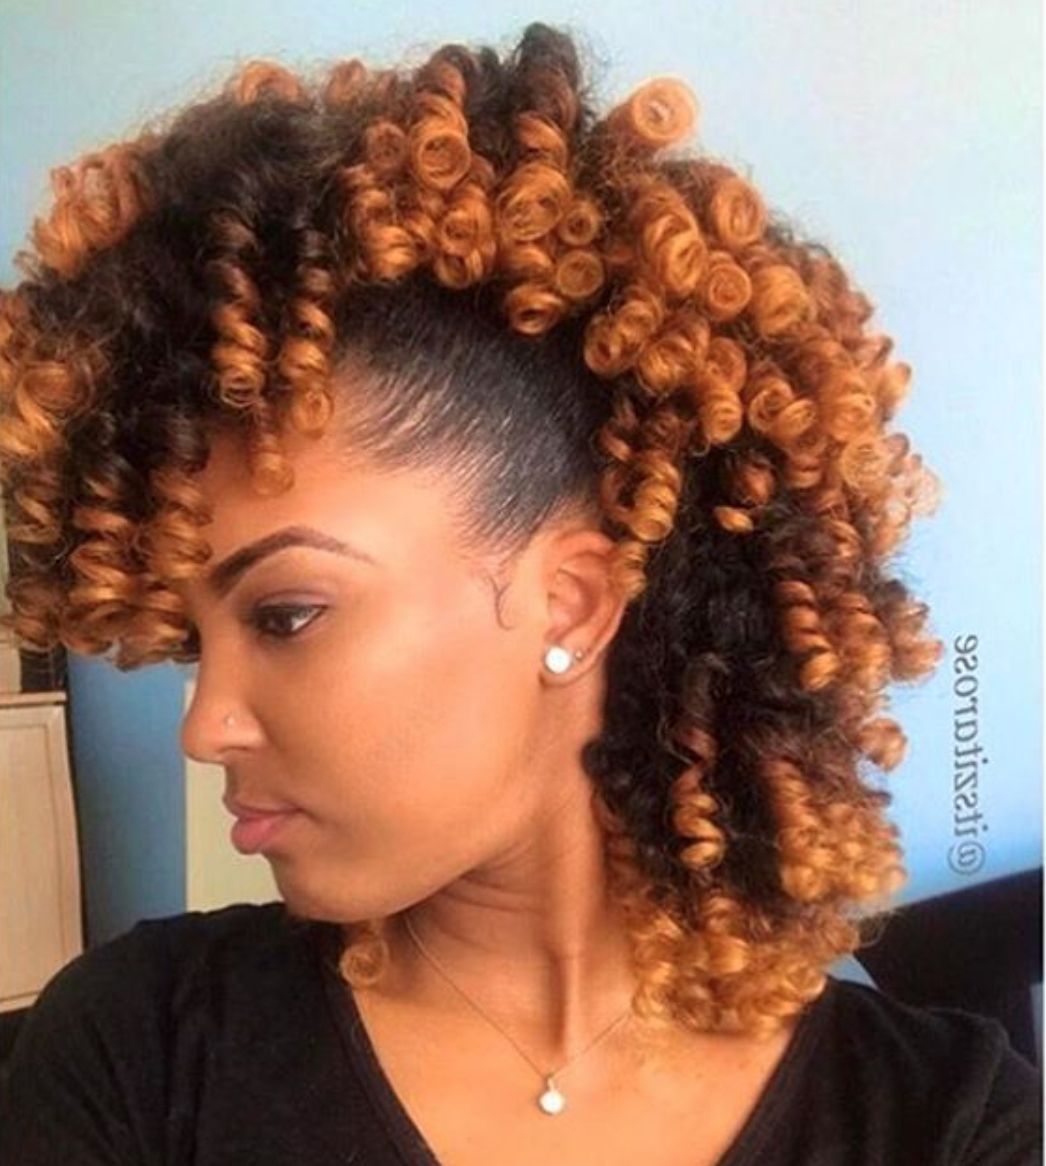 Natural Hair Styles, Hair Pertaining To Well Known Amber Waves Of Faux Hawk Hairstyles (View 11 of 20)